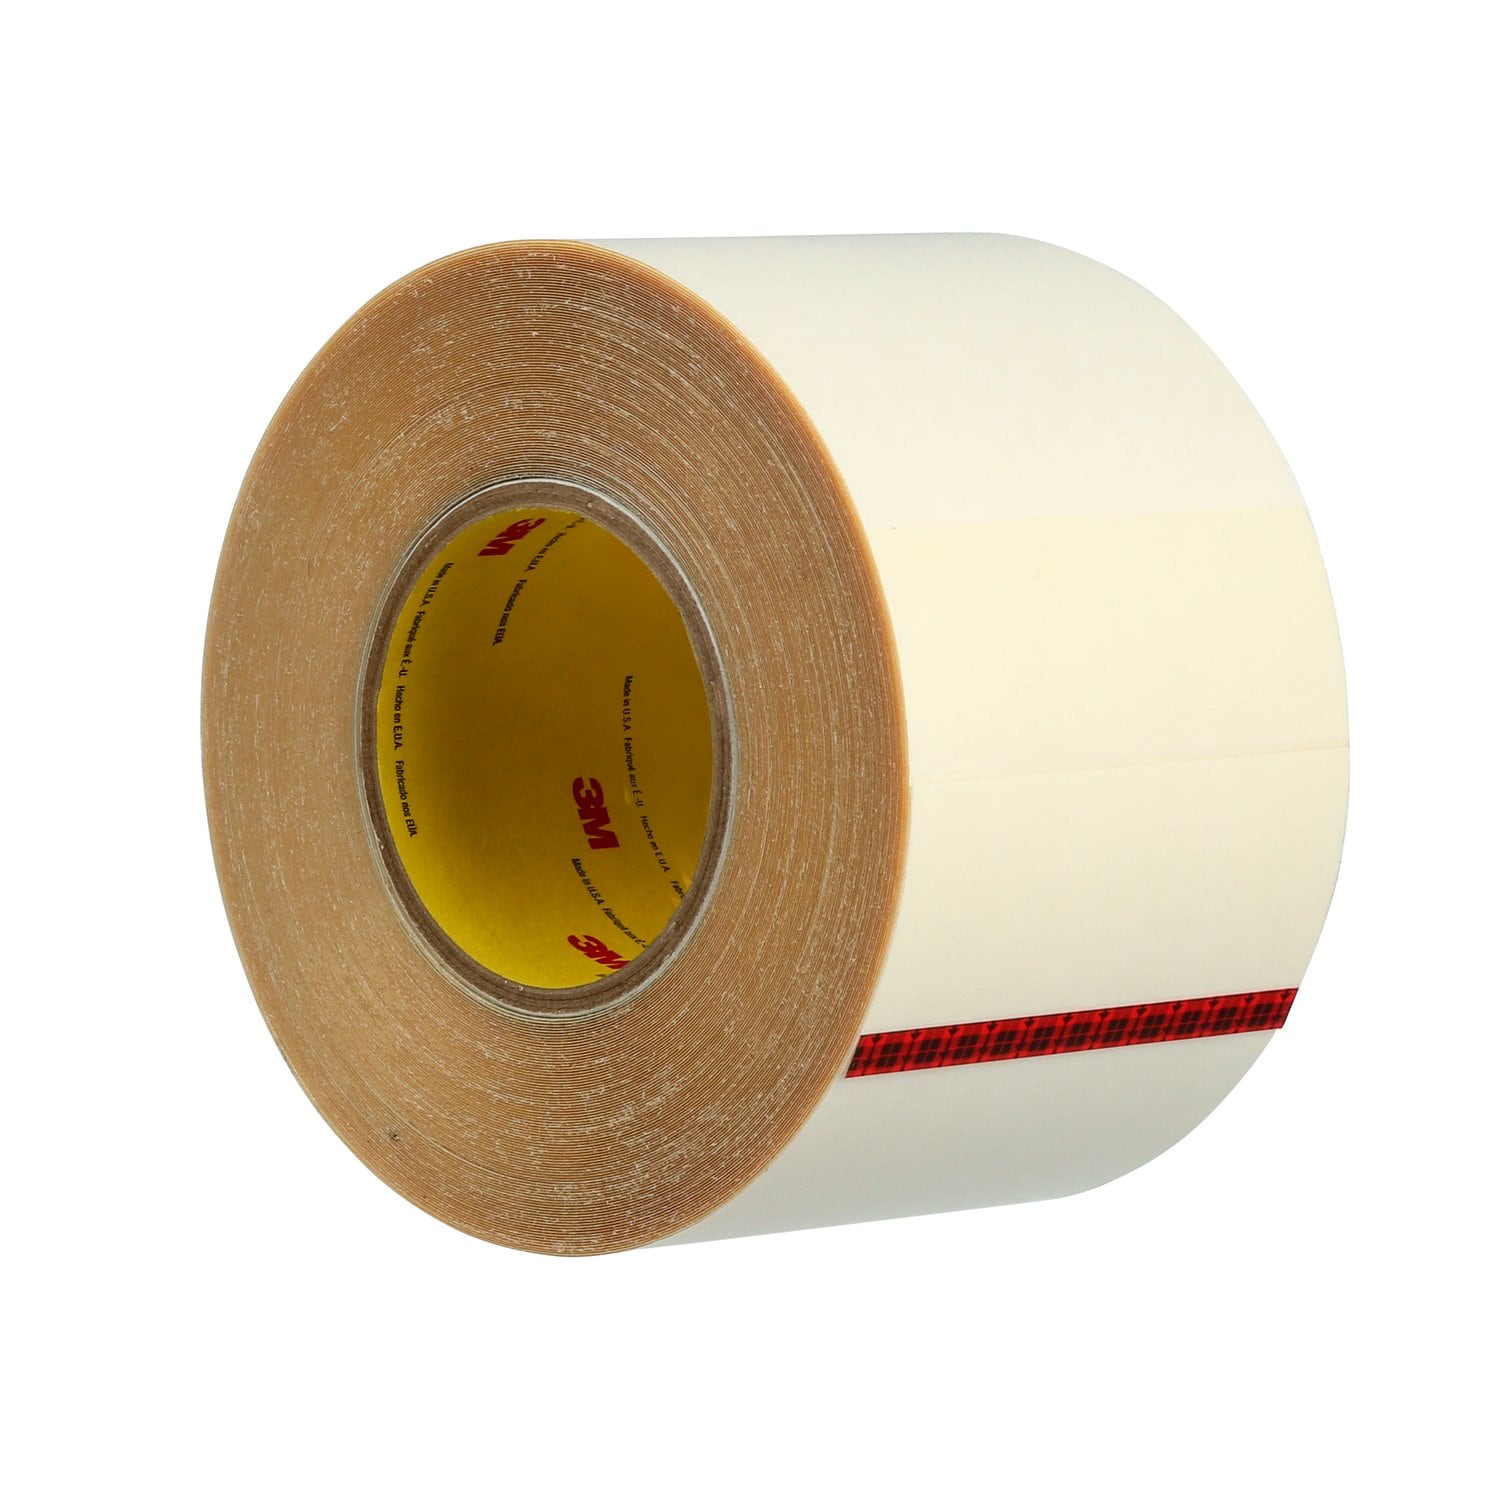 Graphic Grid Tape Self Adhesive Whiteboard Marking, 5 Rolls 6mm